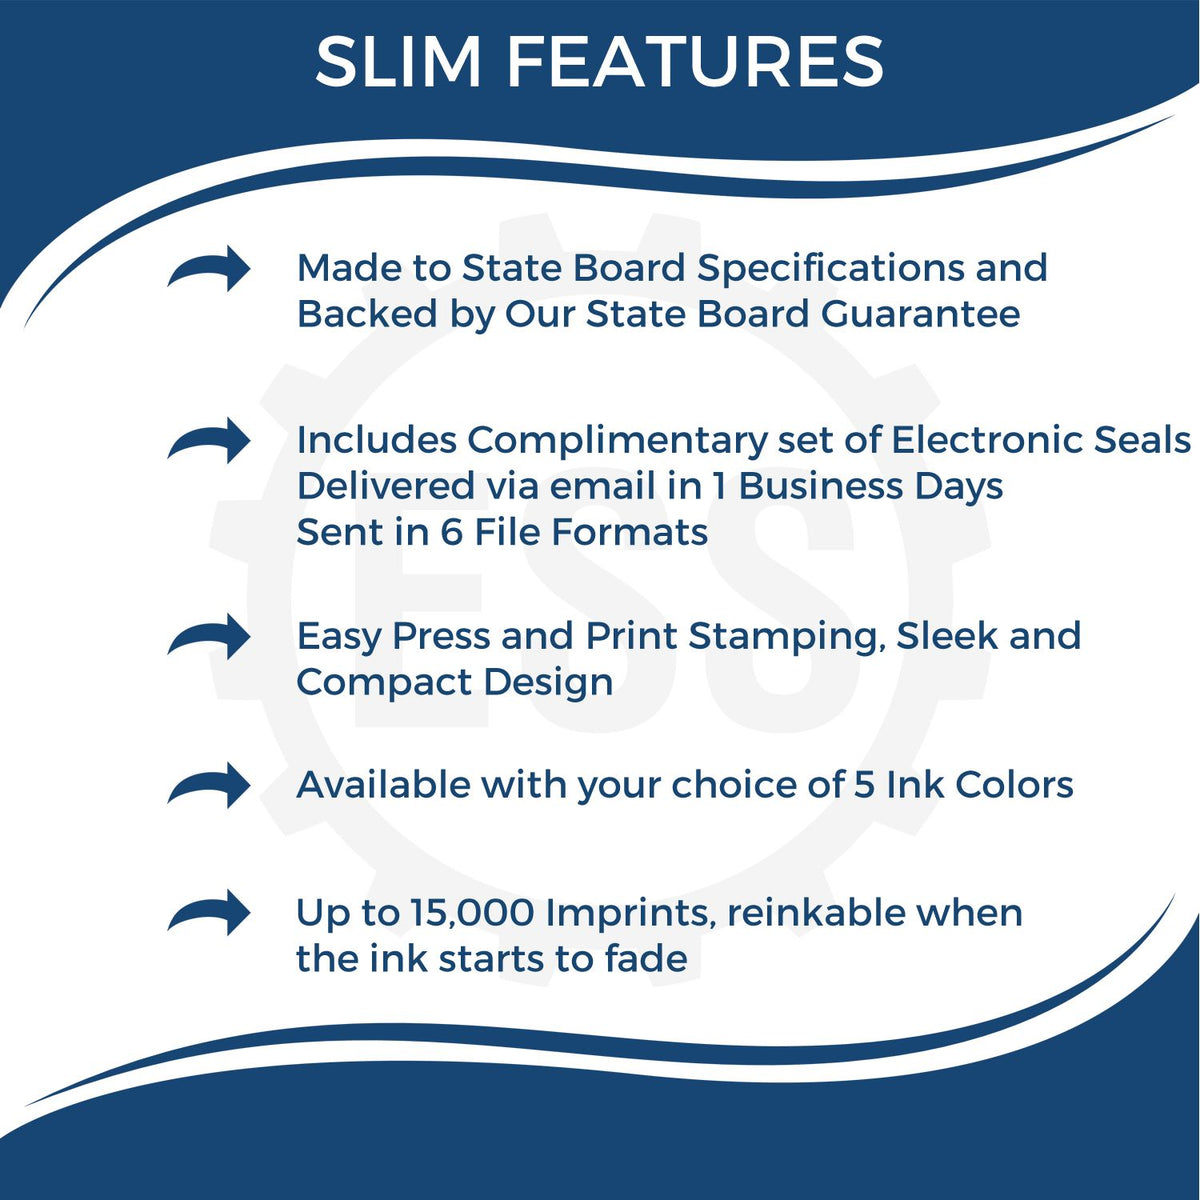 A picture of an infographic highlighting the selling points for the Super Slim Kentucky Notary Public Stamp